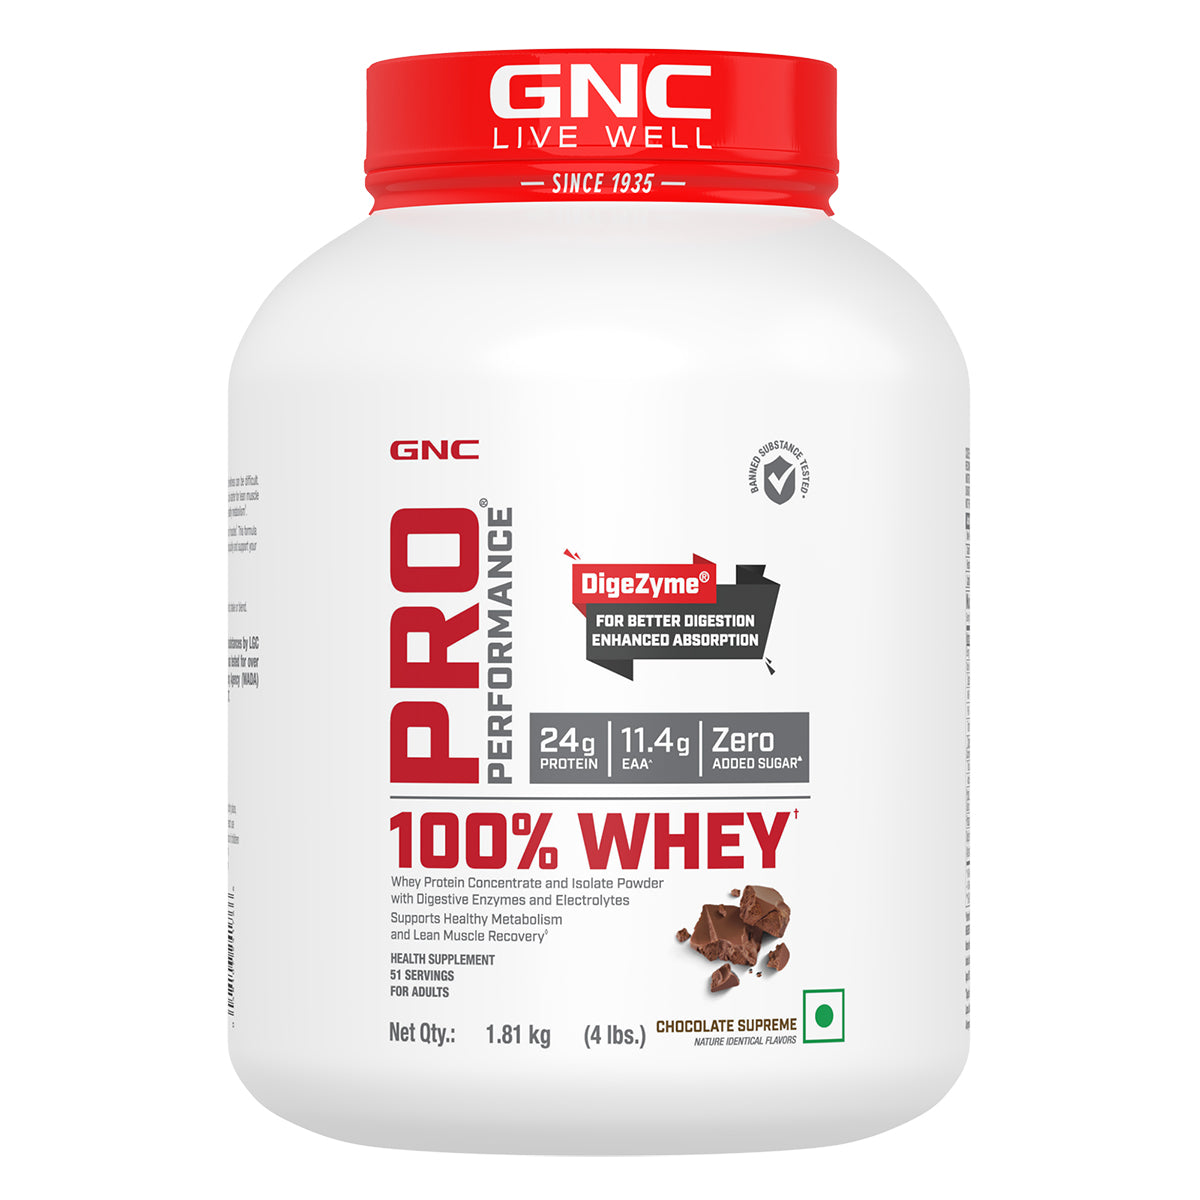 GNC Pro Performance Limited Edition Pack - Faster Recovery & Lean Muscle Gains | Improves Energy & Focus